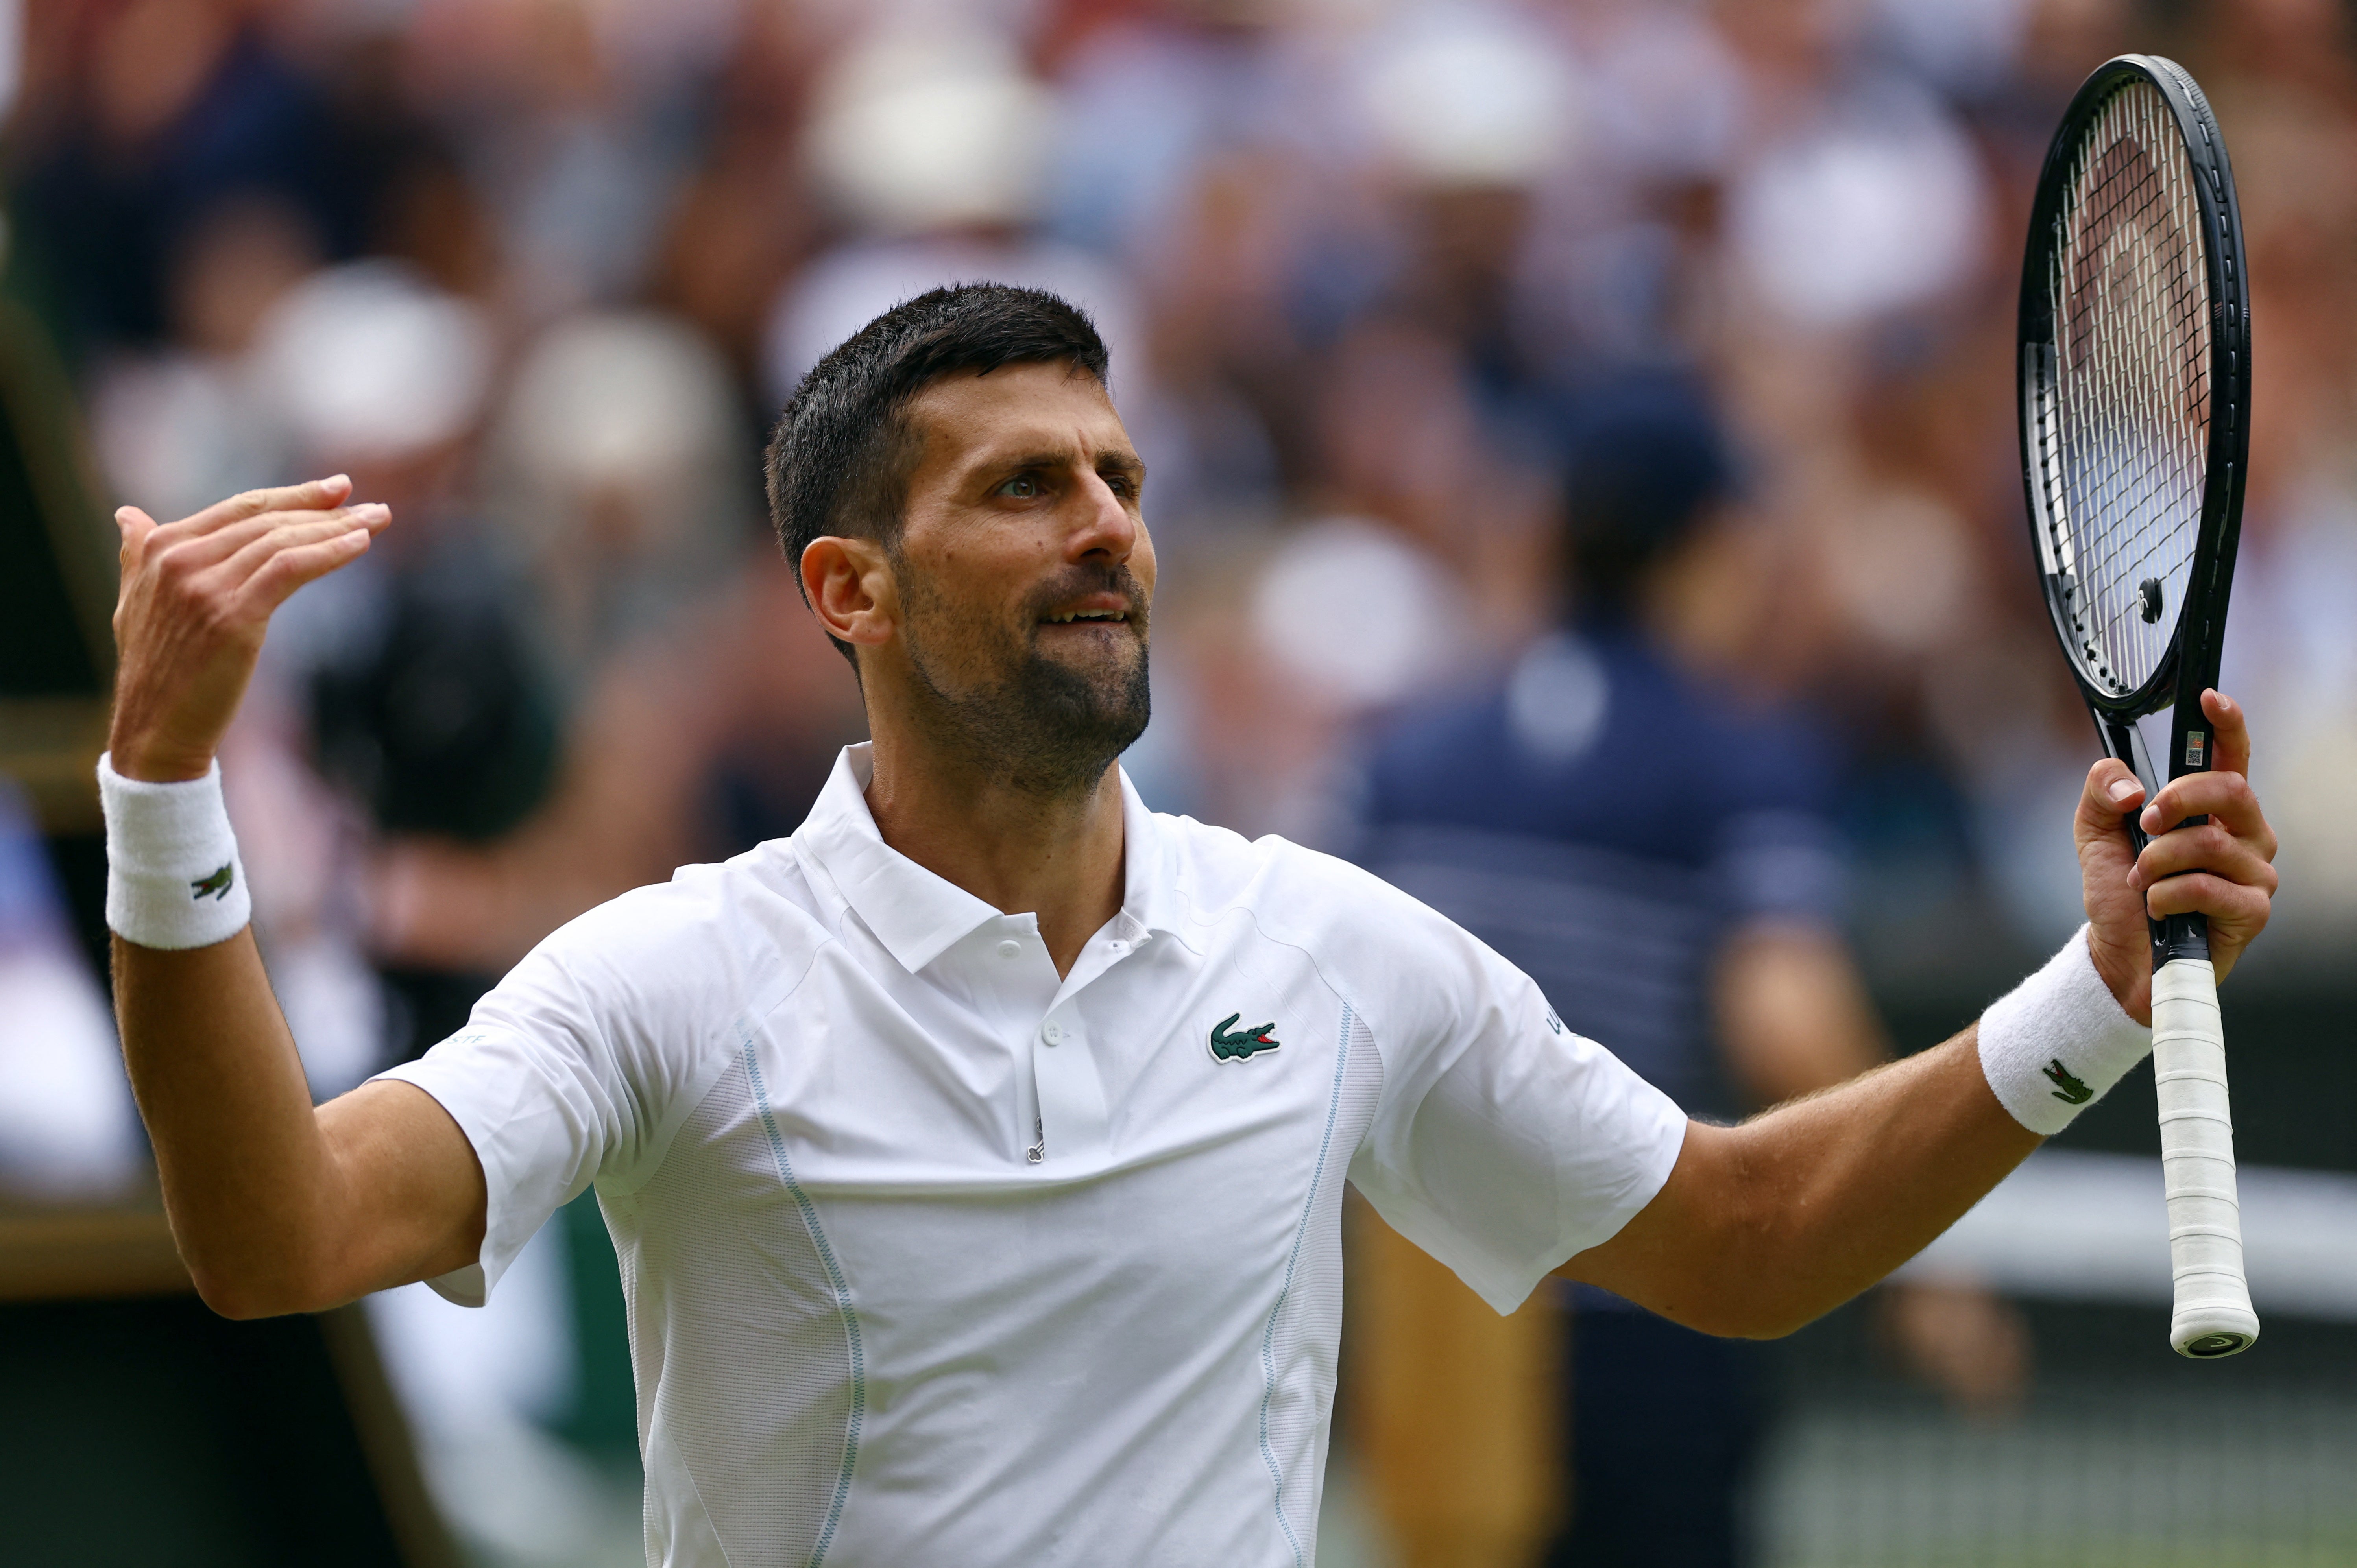 Djokovic broke early in the match and won the crucial second-set tiebreak